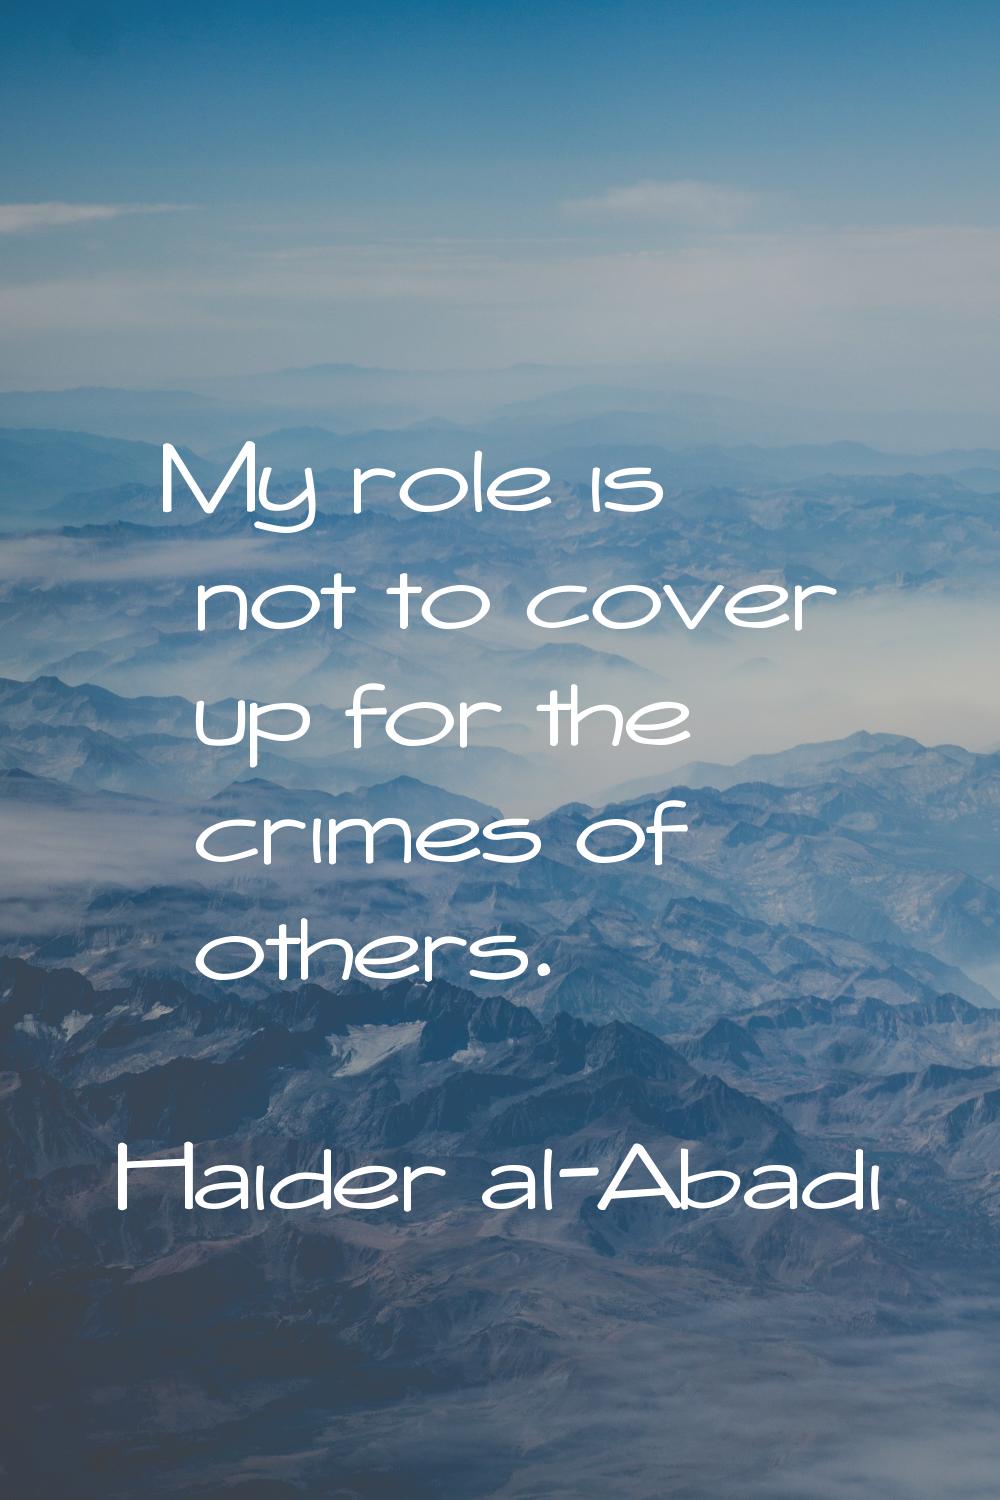 My role is not to cover up for the crimes of others.